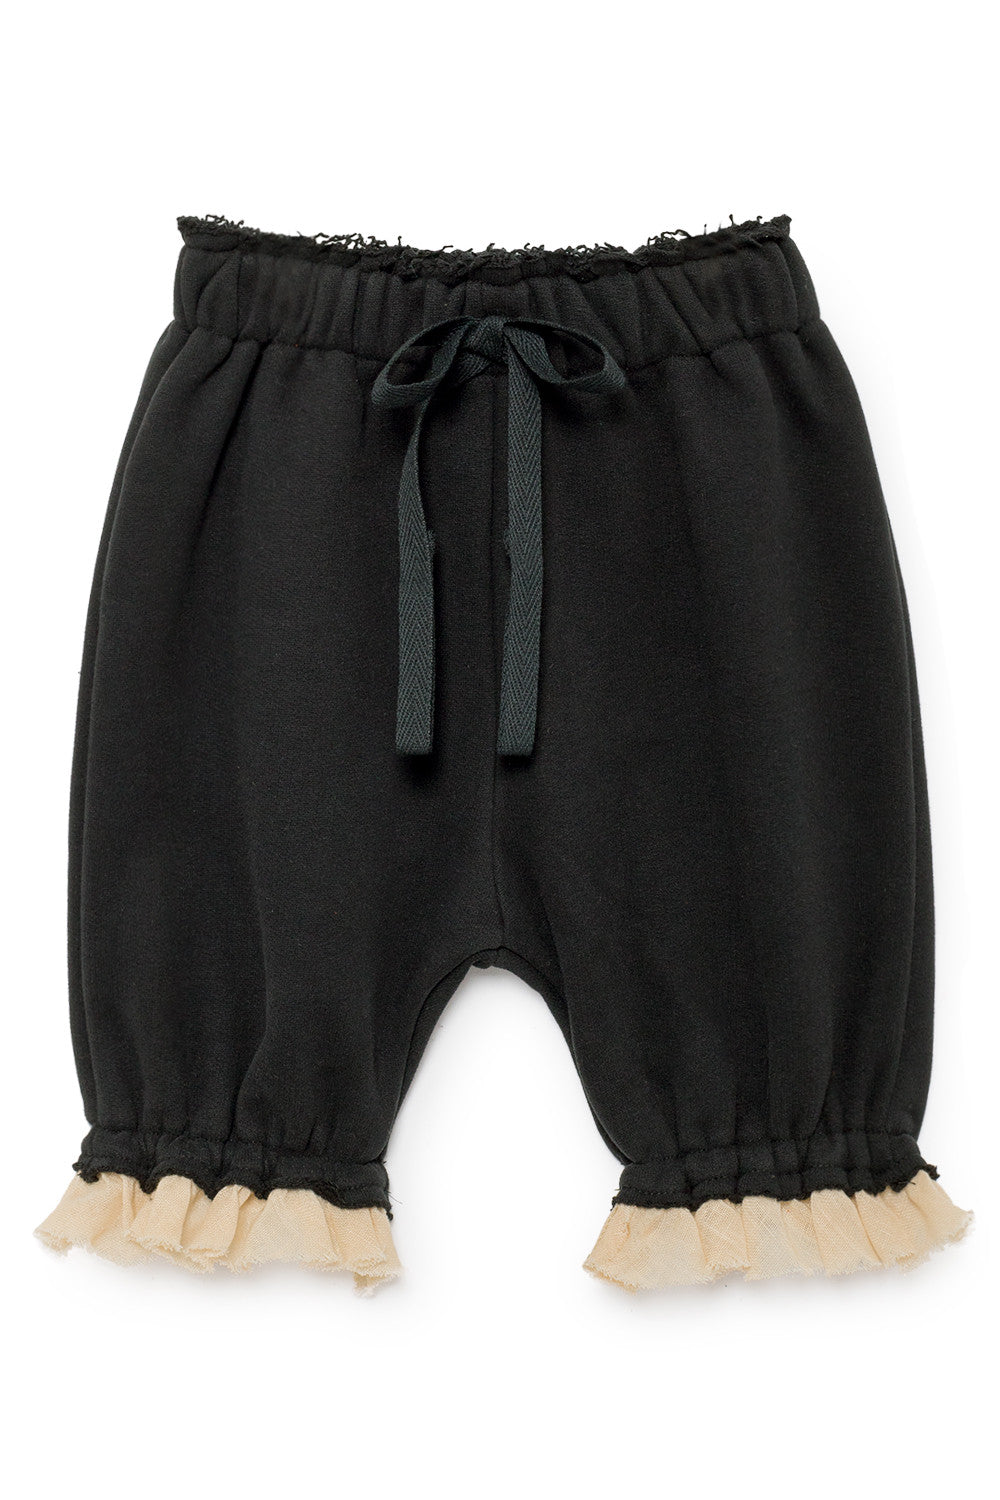 Little Creative Factory Black Baby Gala's Bloomers – Panda and Cub